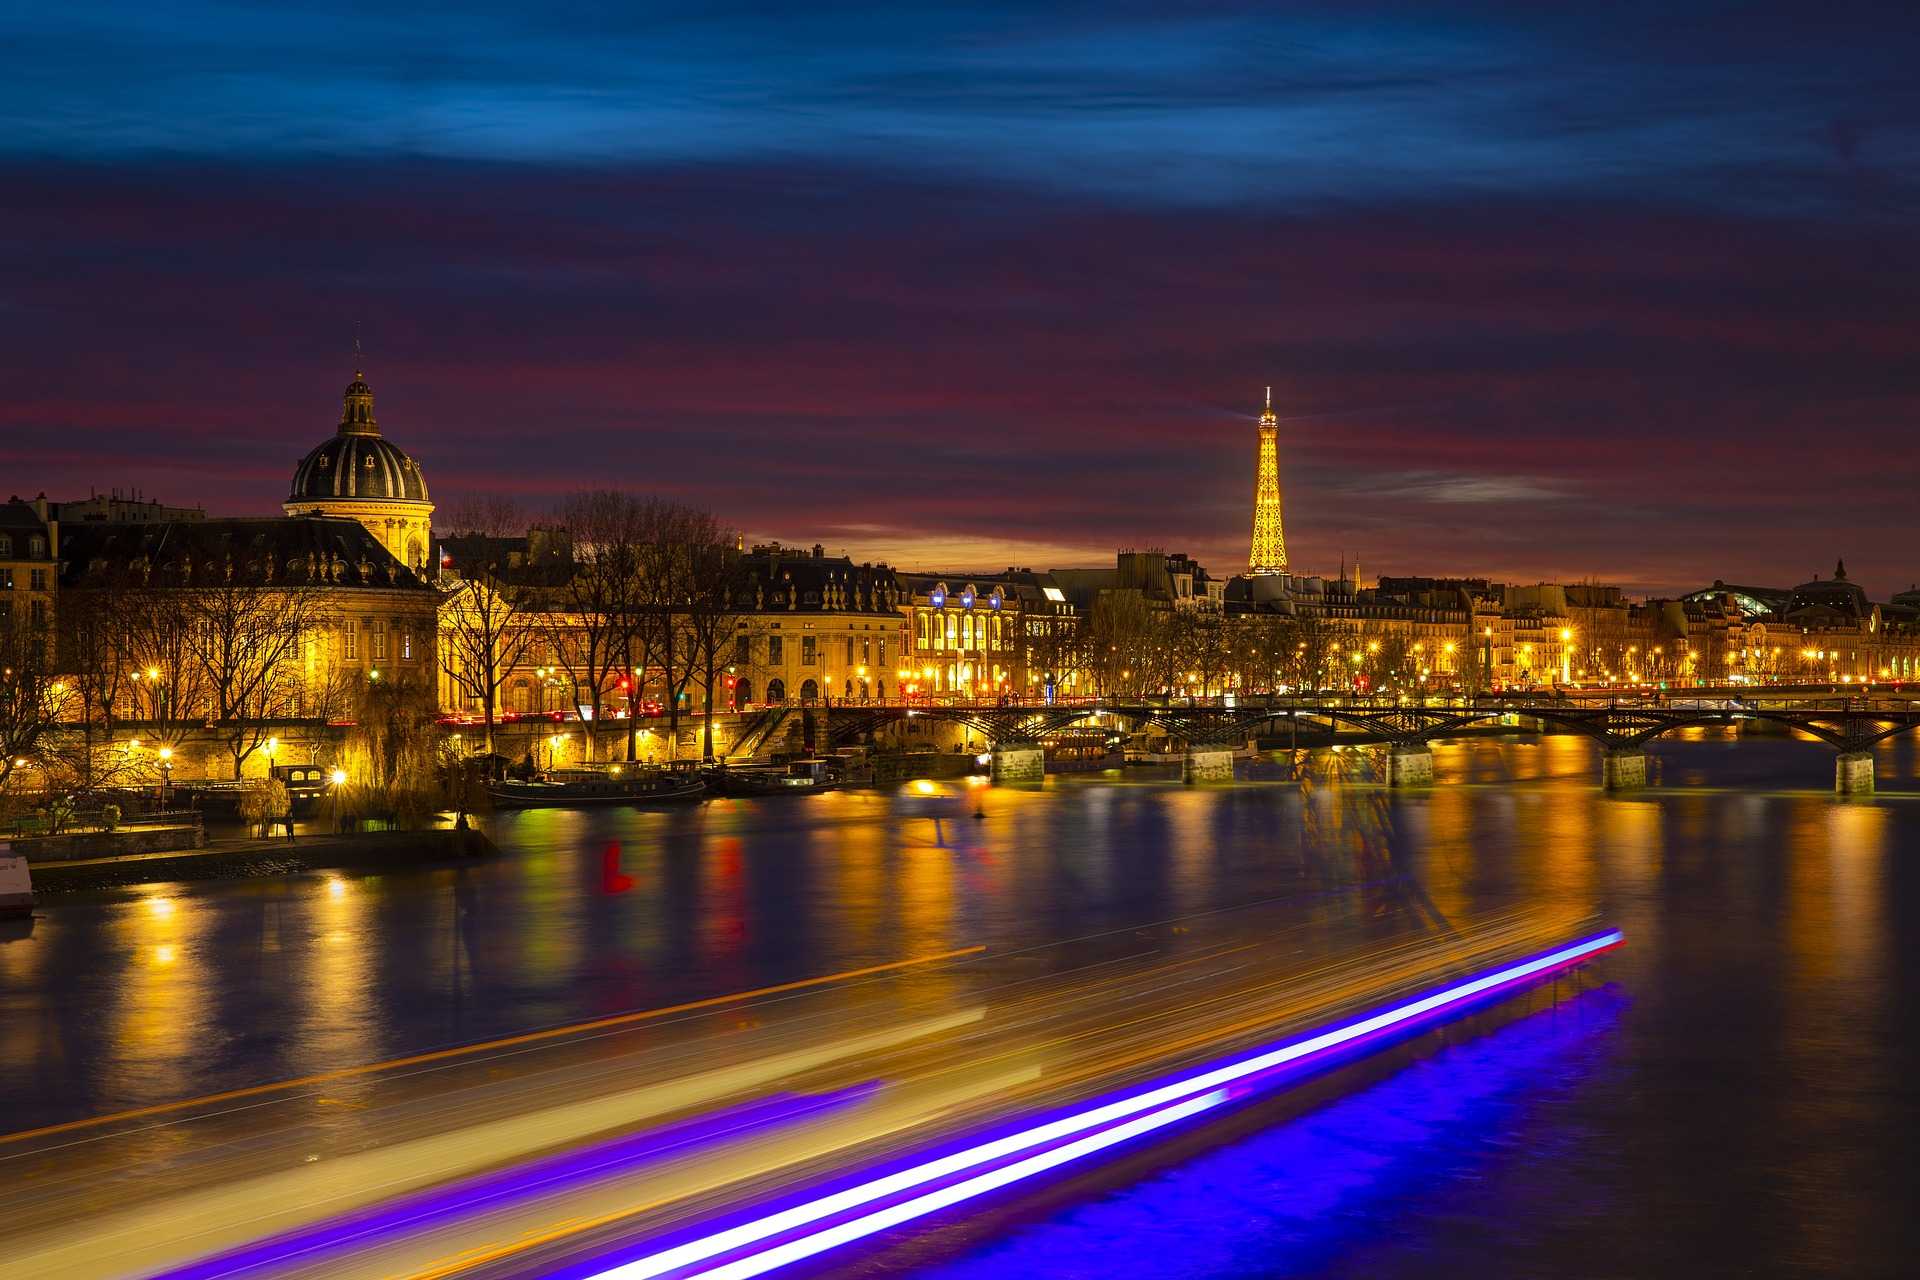 Seine River Cruise Tickets And Prices 